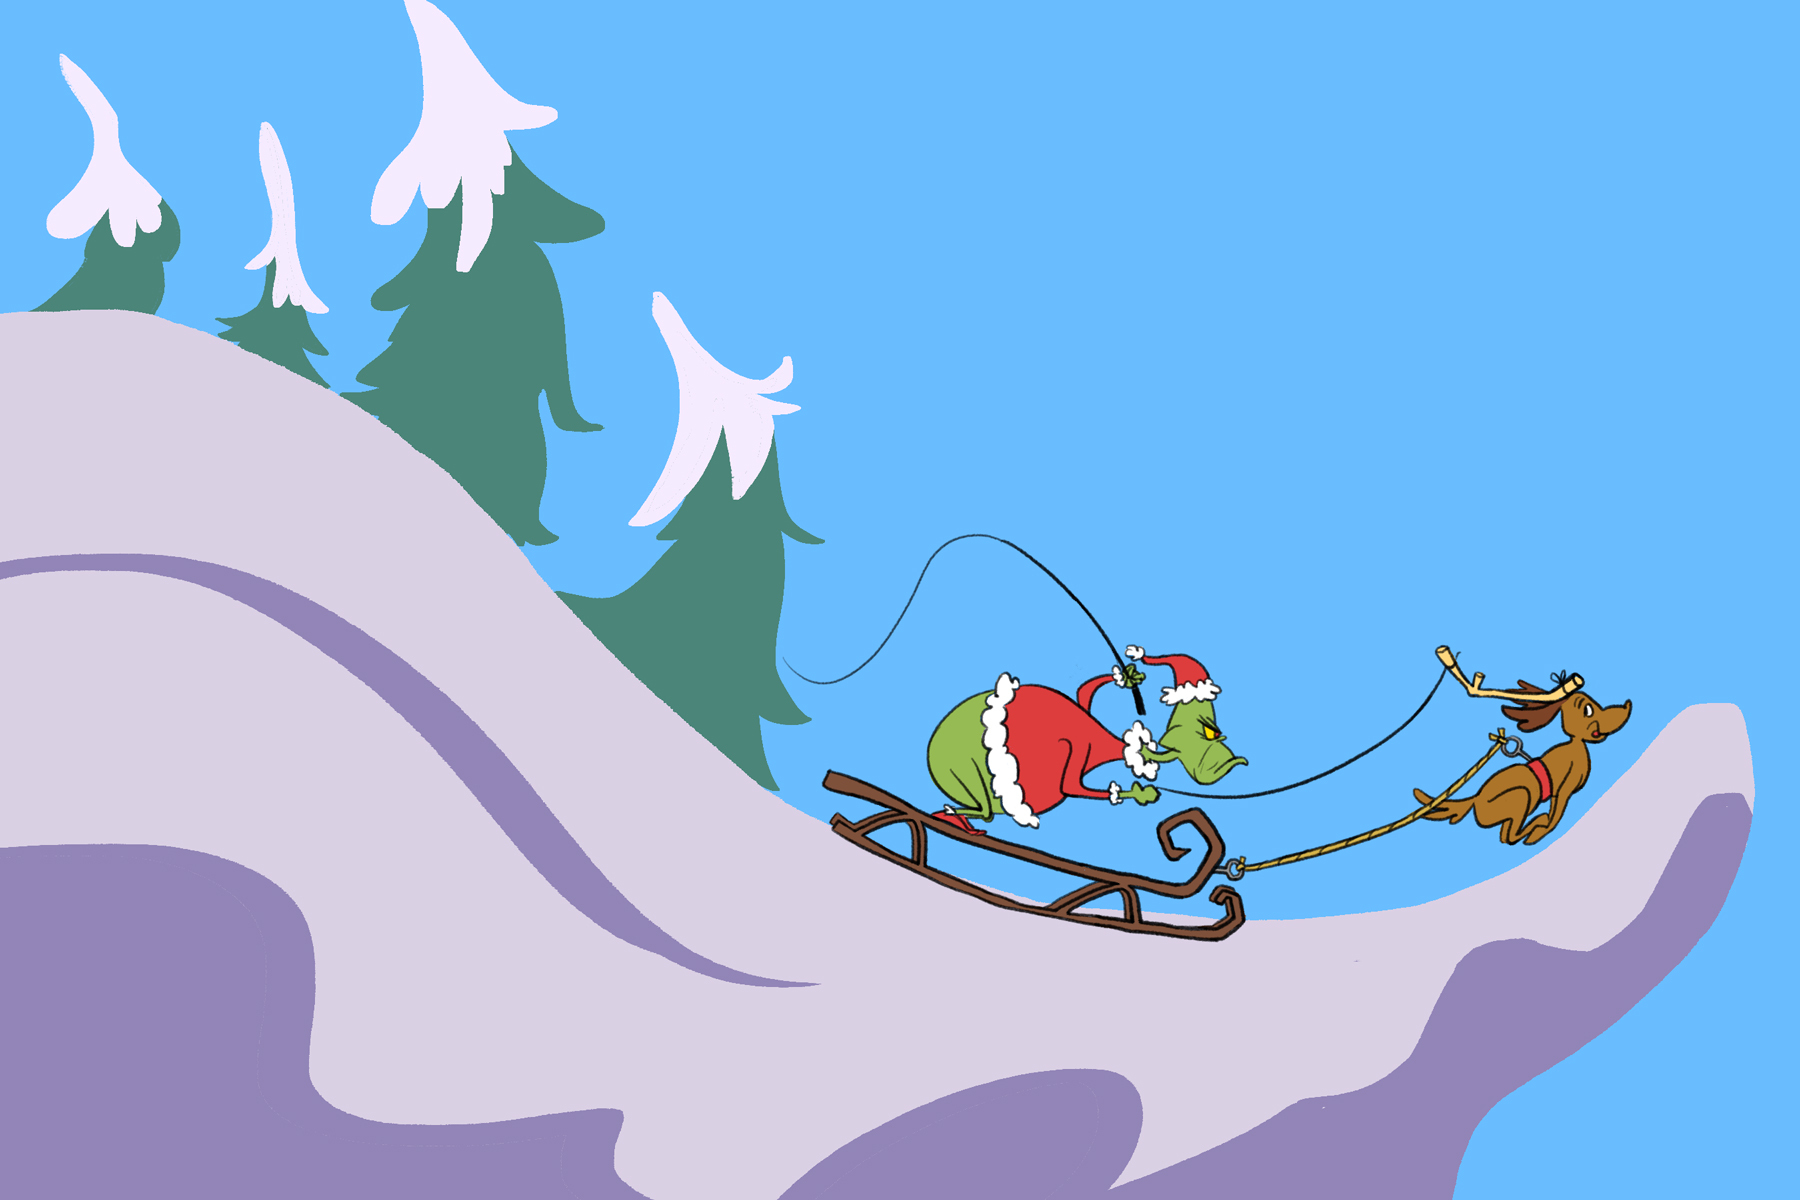 Illustration of the Grinch riding up a snowy slope with his dog Max.